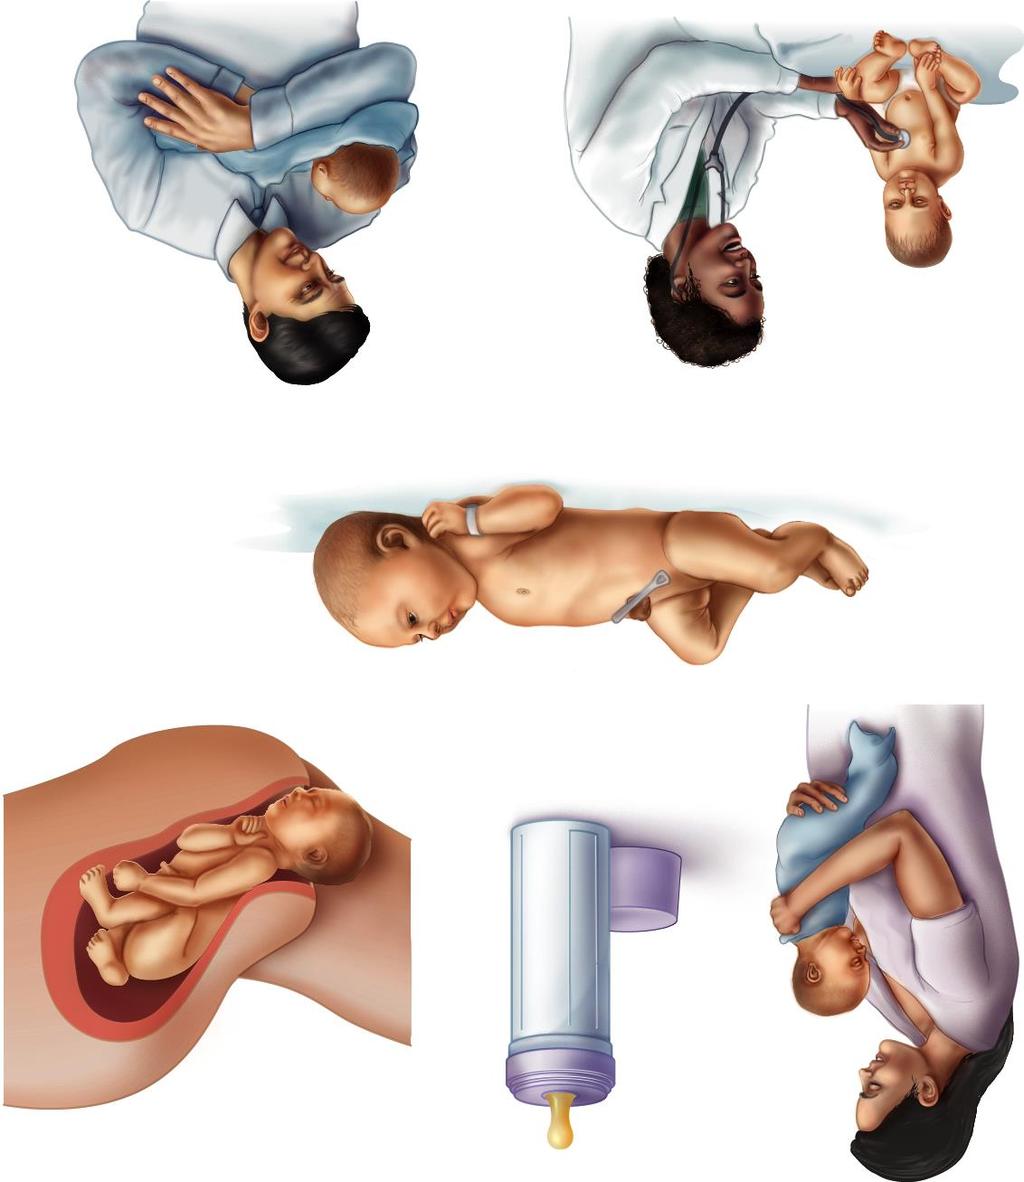 Initial colonization of the newborn Uterus and contents are normally sterile and remain so until just before birth